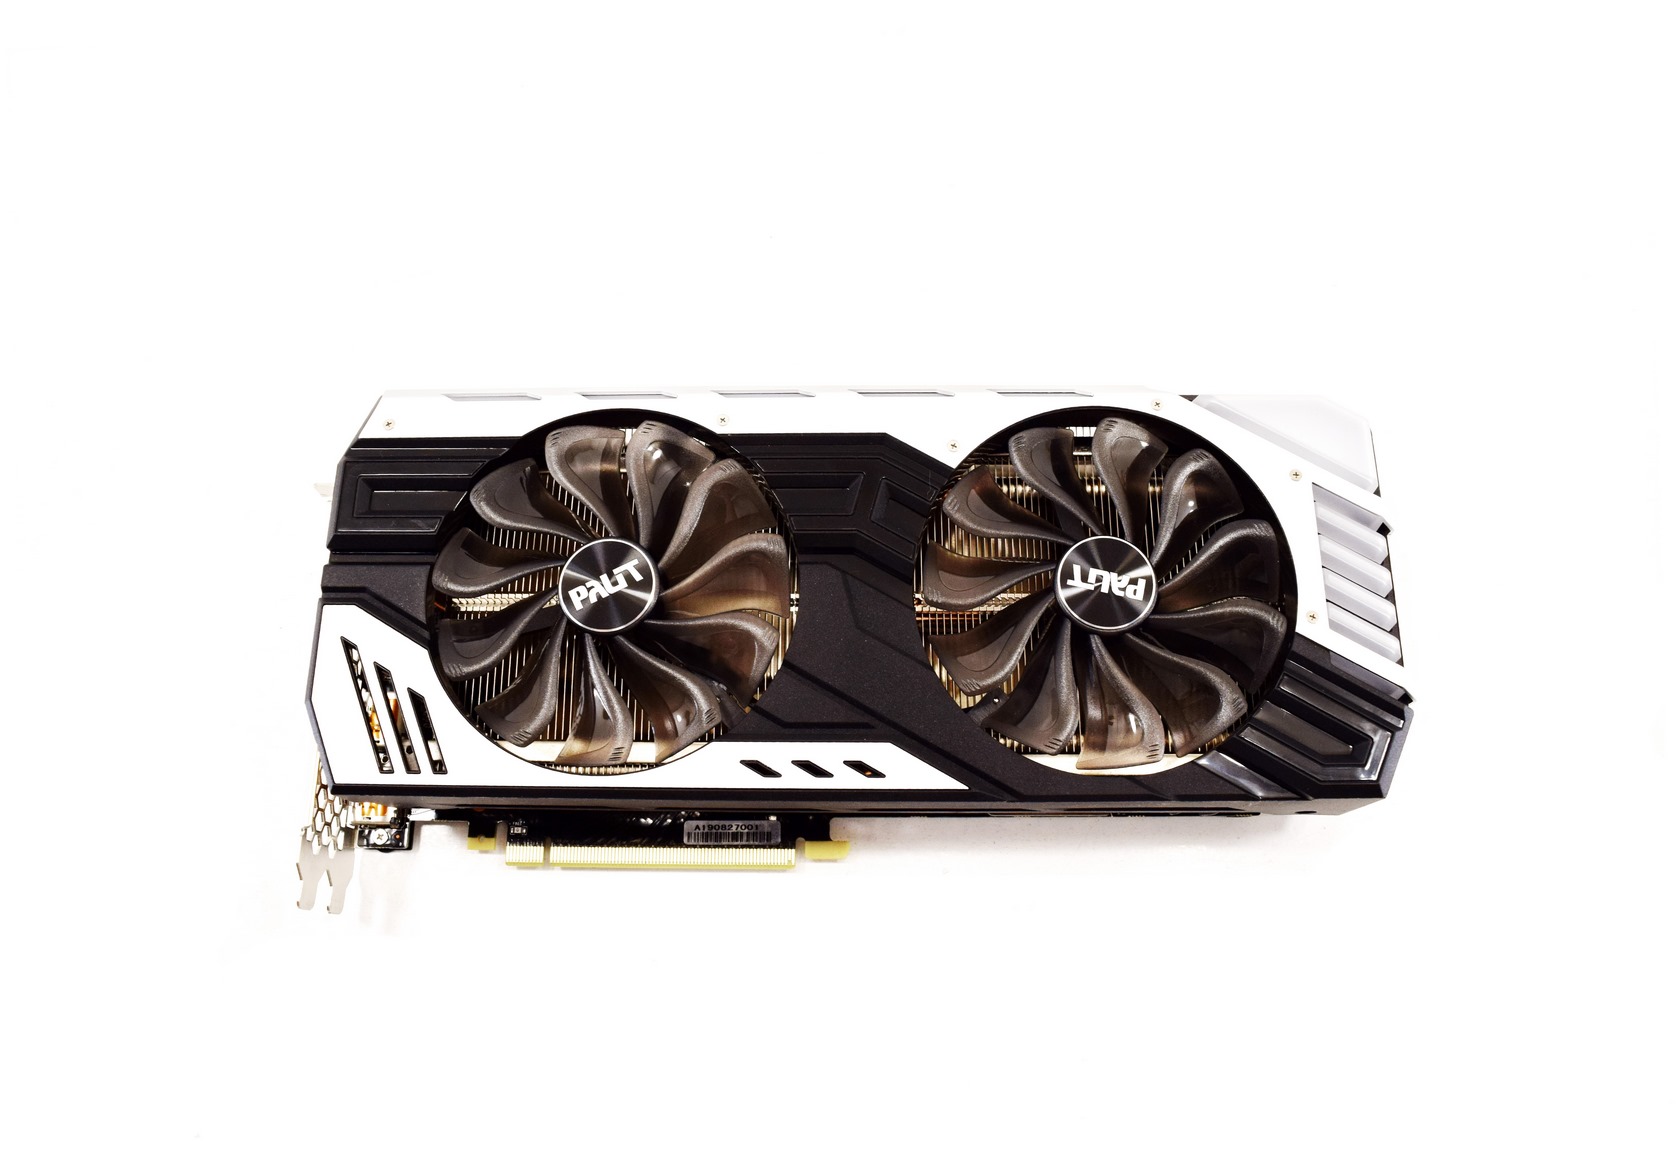 Palit GeForce RTX Super JetStream Graphics Card Review